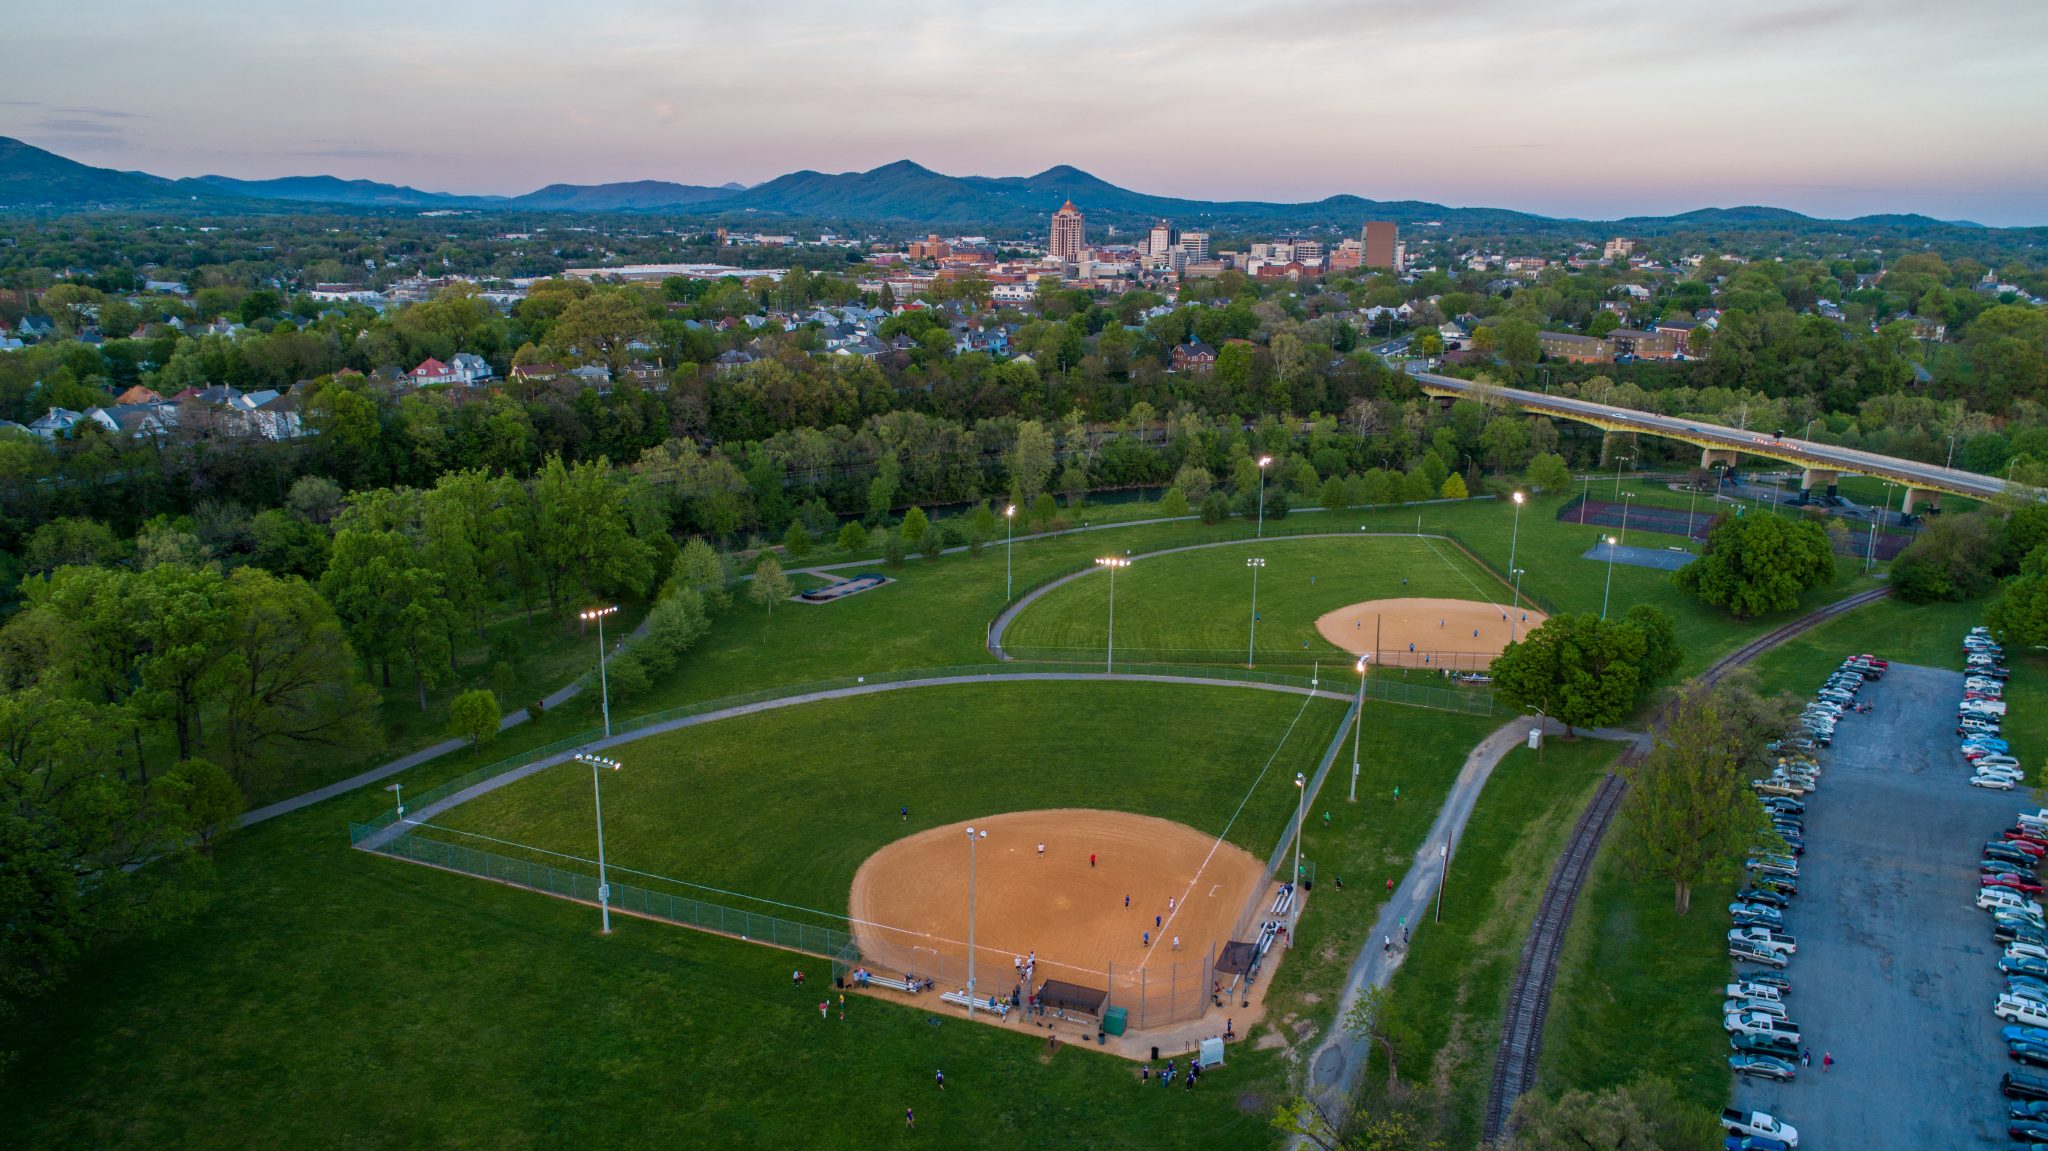 Wasena Park Softball Fields with city skyline in the background